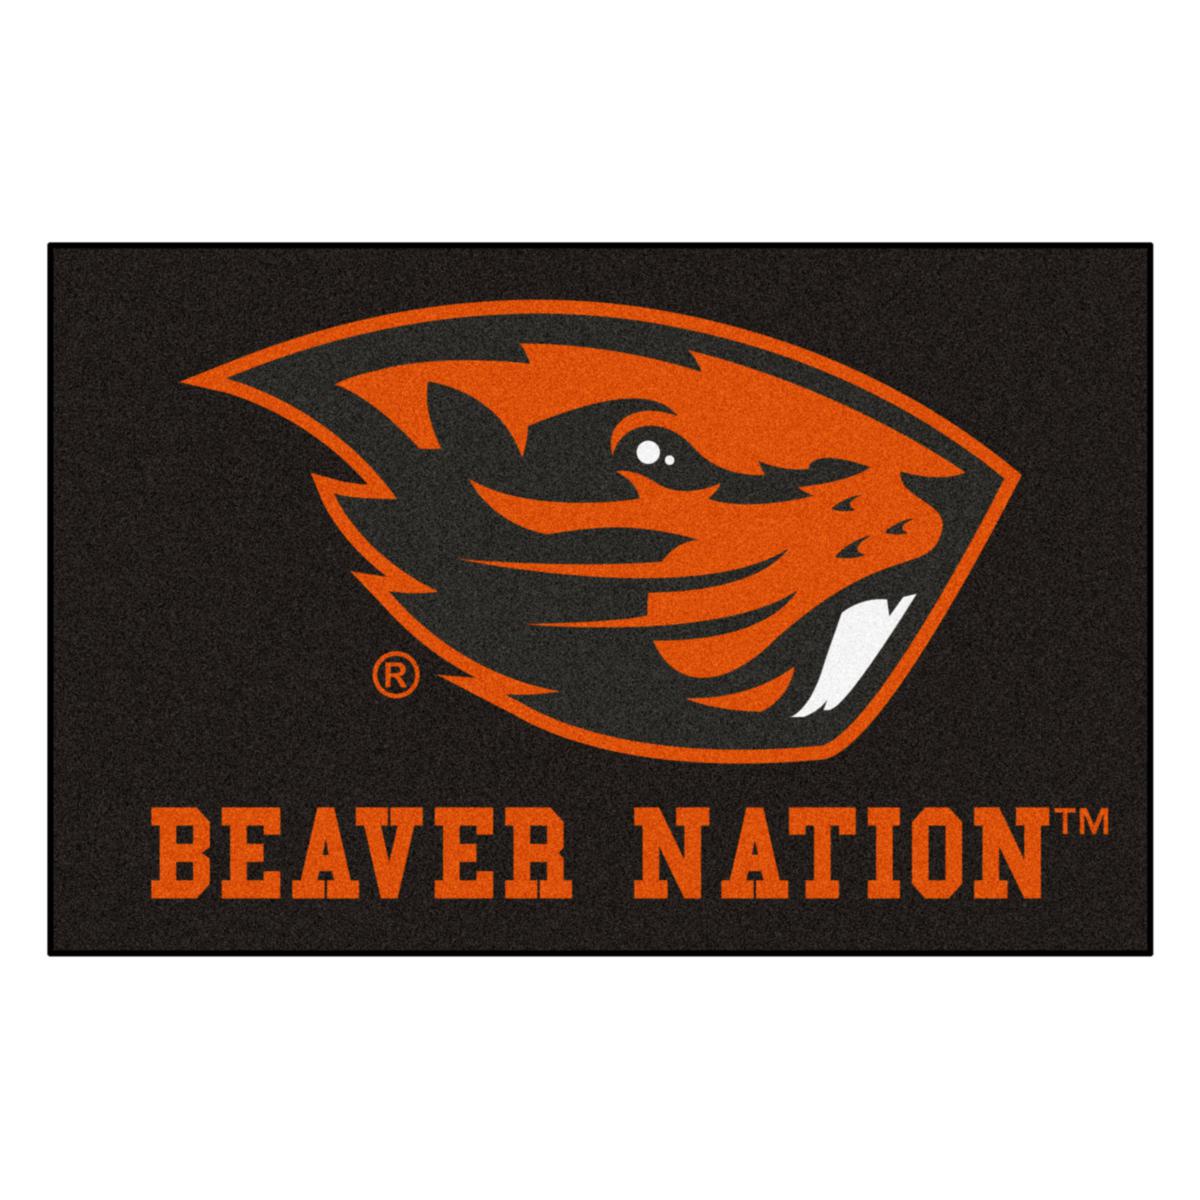 Our family will always be #Beavers. So sad to see the death of Beavers Athletics as we've known it, but we will continue to love #OregonStateUniversity and the students and athletes there. #GoBeavs